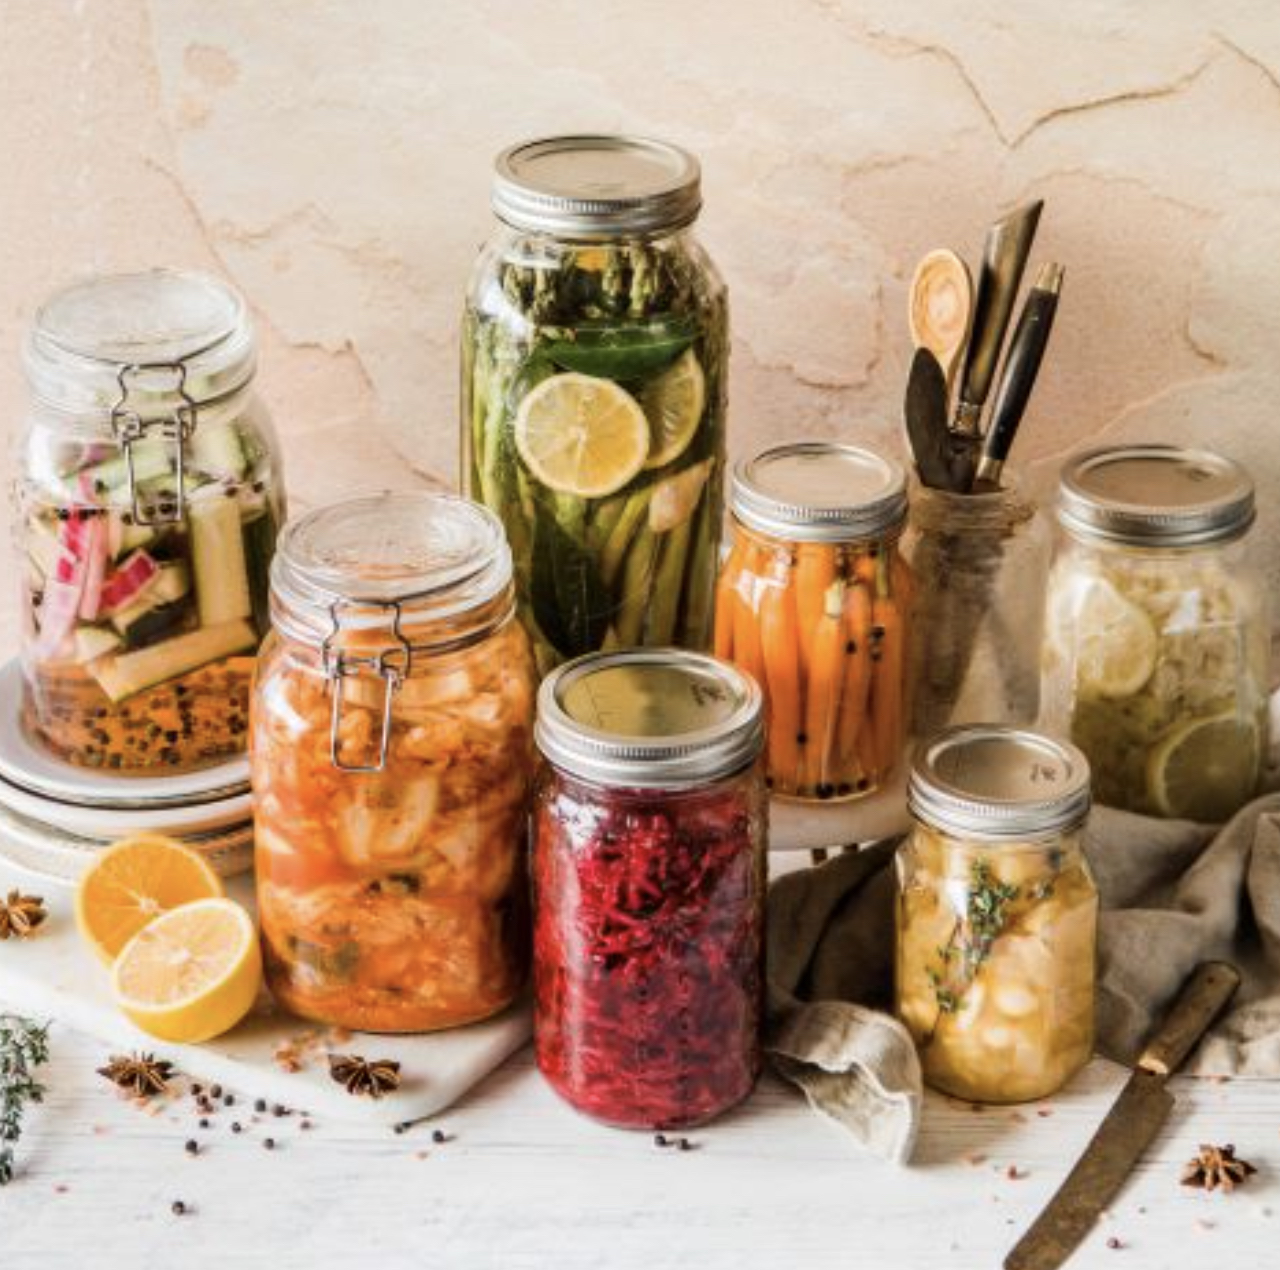 Jars of preserved vegetables sit on a table.